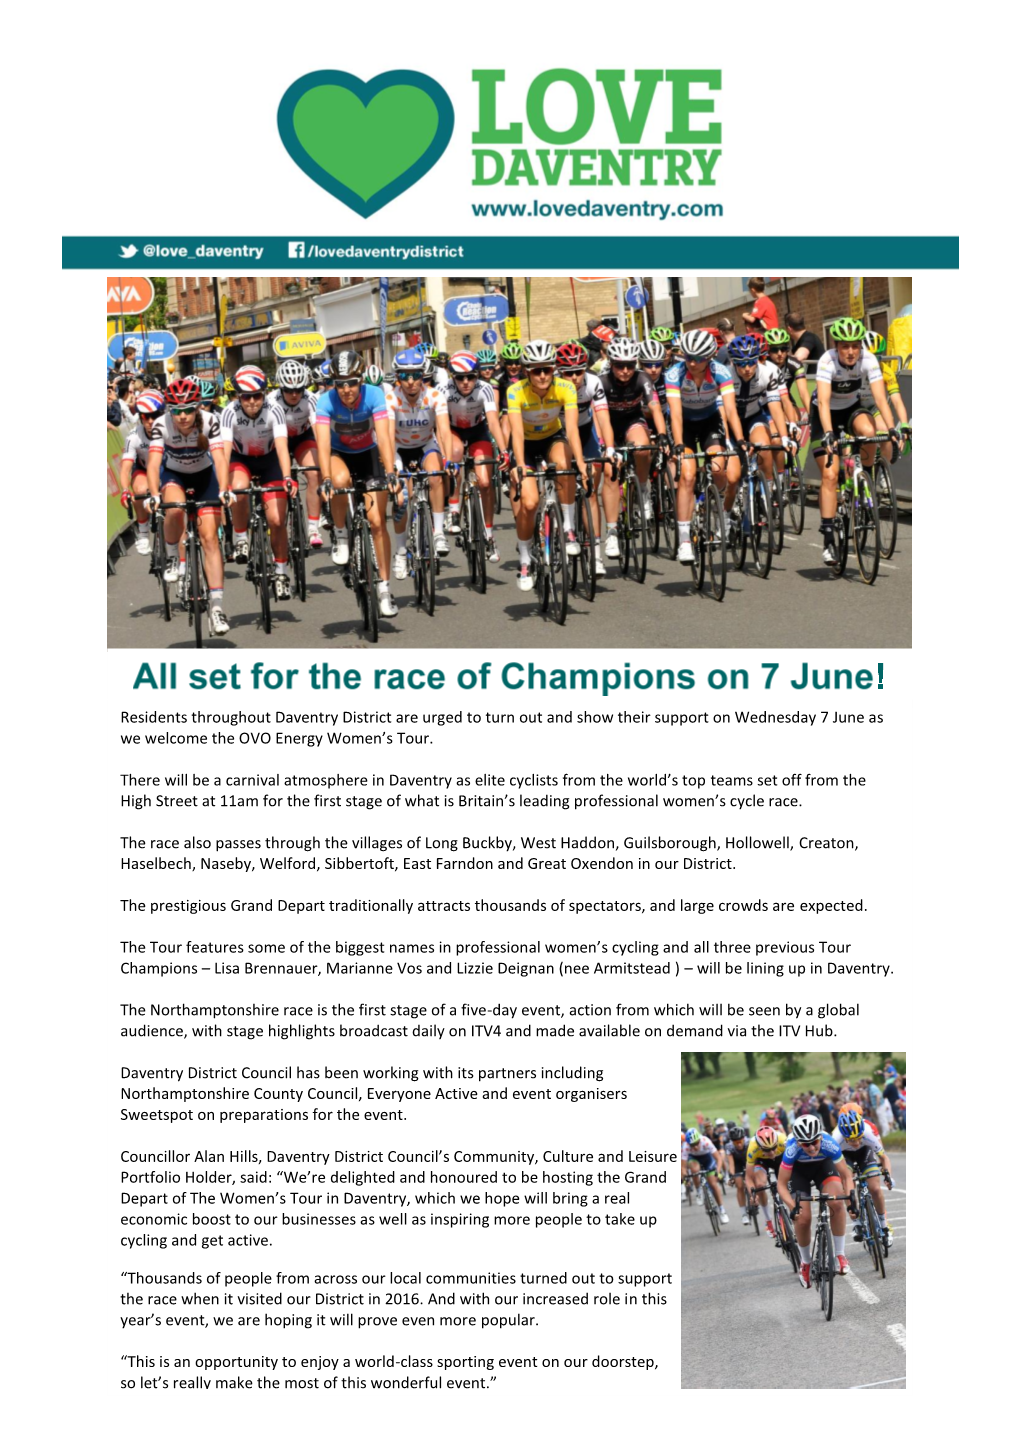 Residents Throughout Daventry District Are Urged to Turn out and Show Their Support on Wednesday 7 June As We Welcome the OVO Energy Women’S Tour